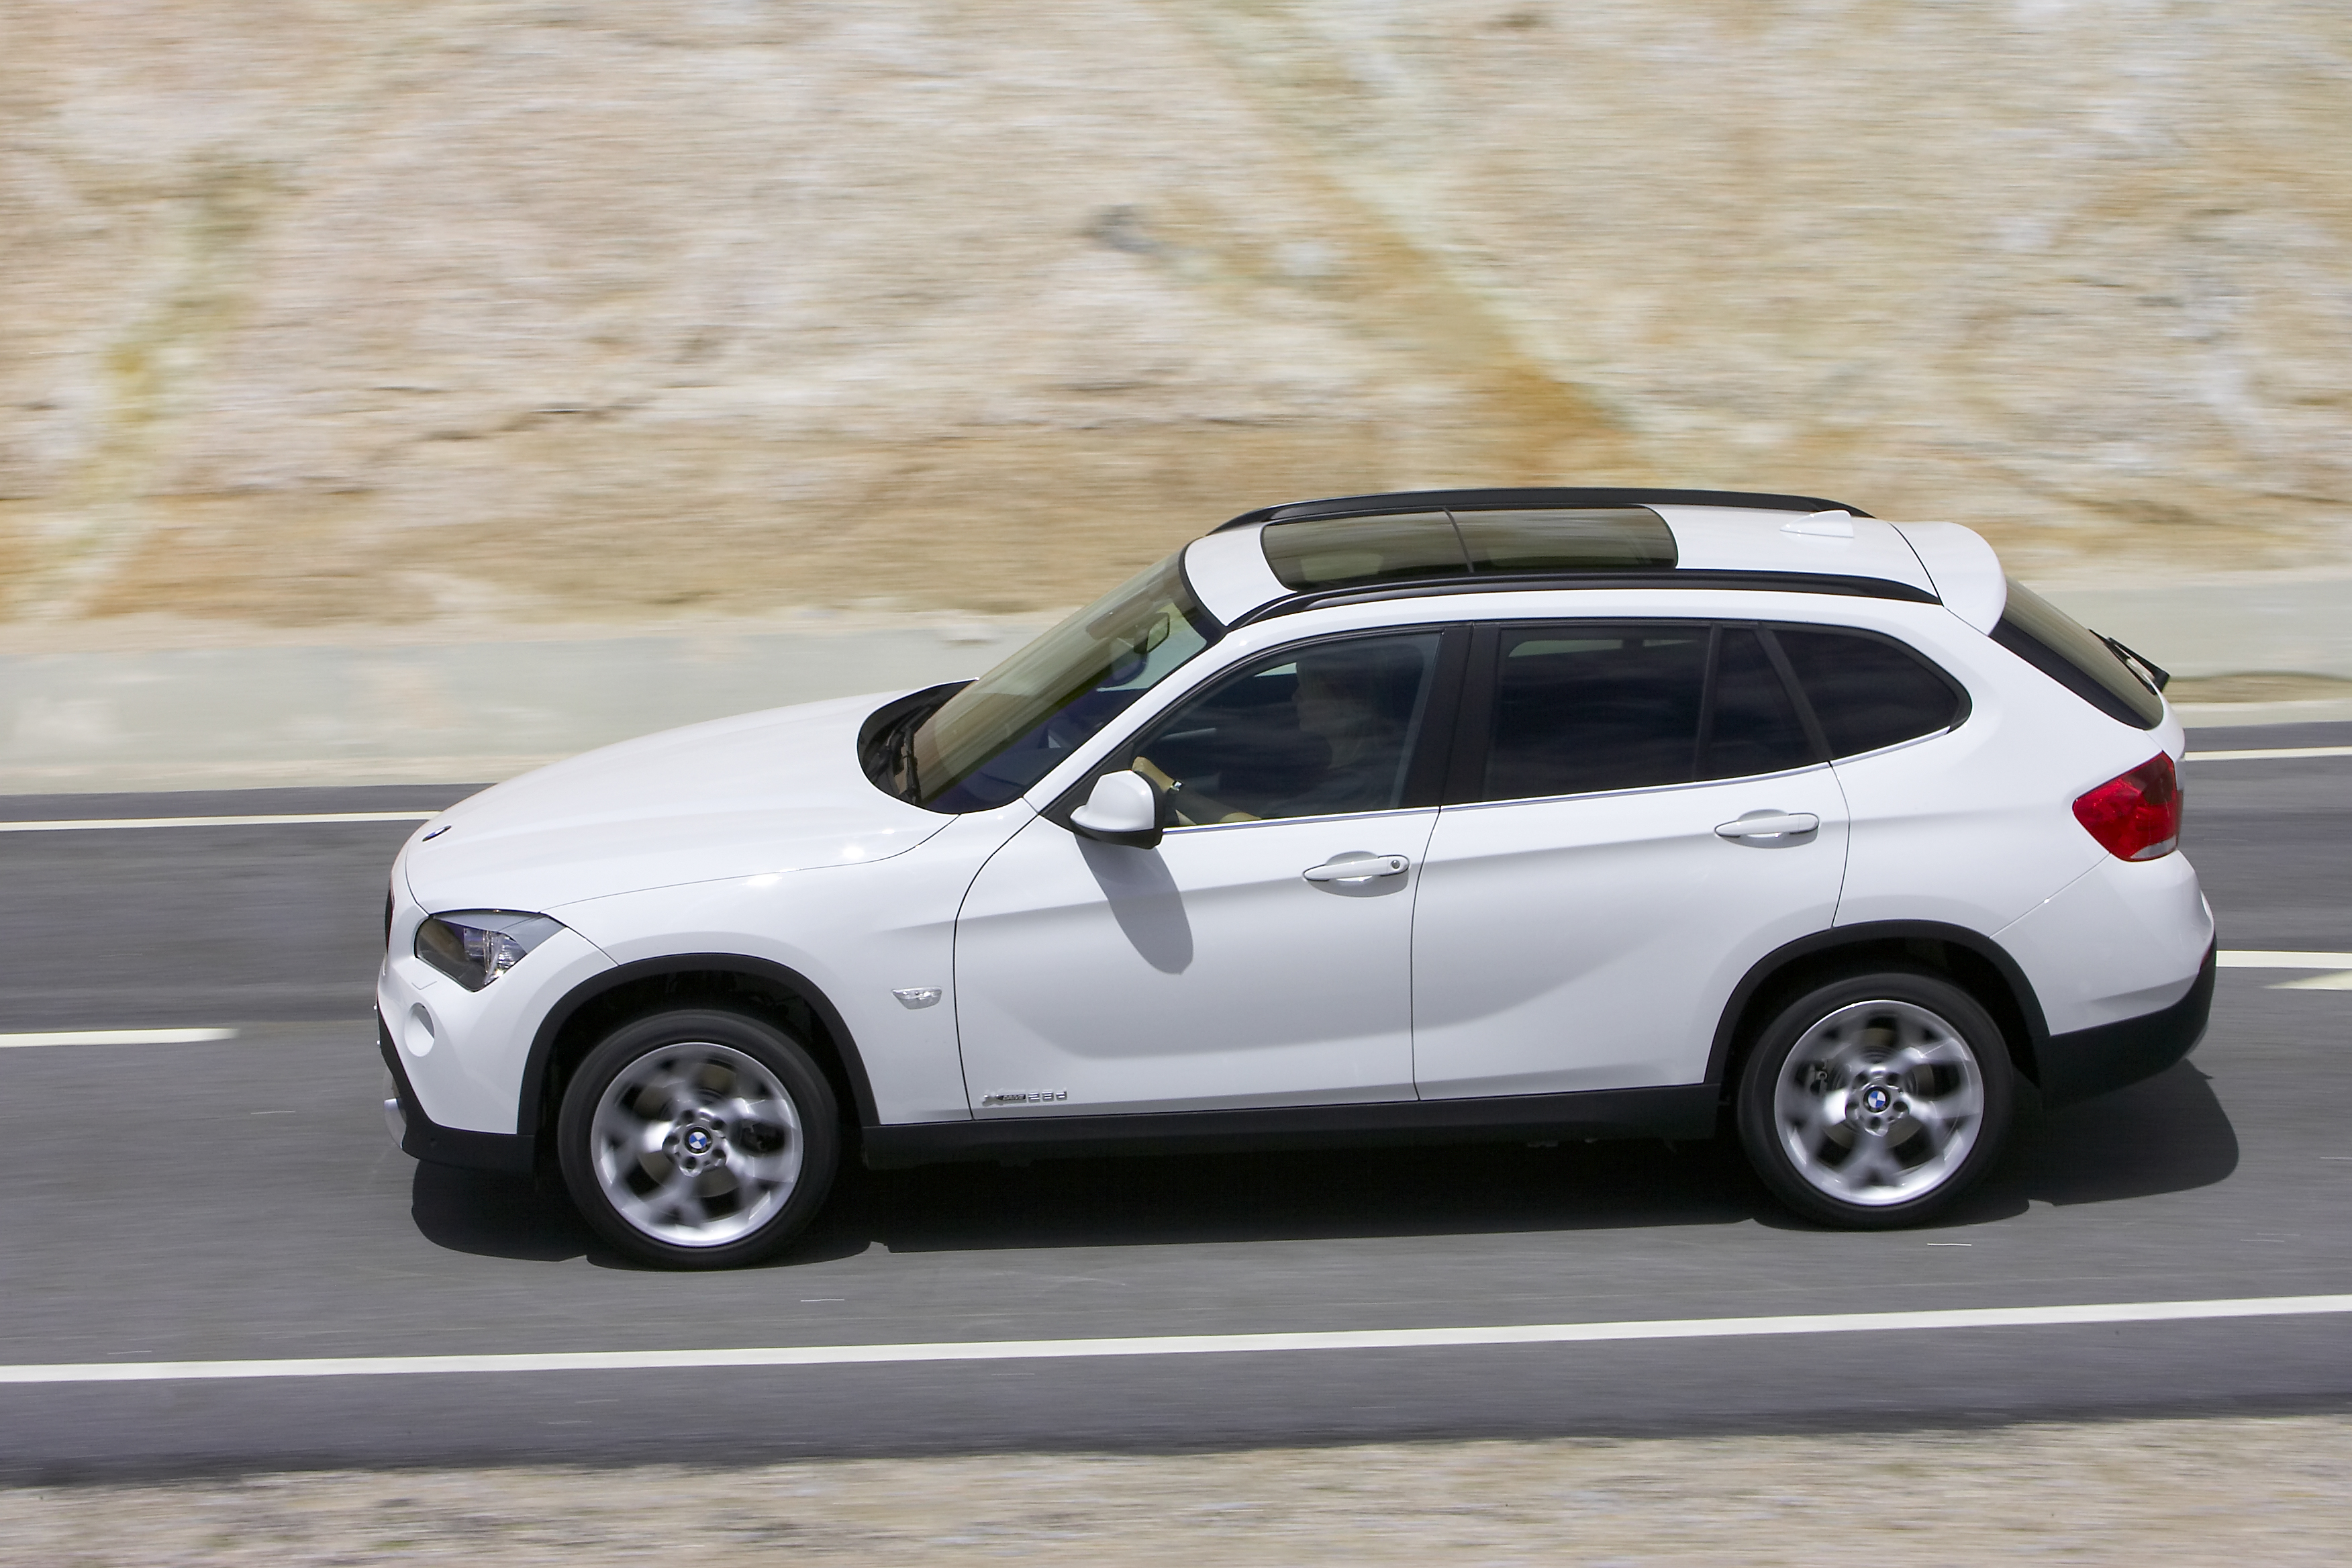 Since the BMW X1, 175 inches overall length, is almost the size as X3 at 180